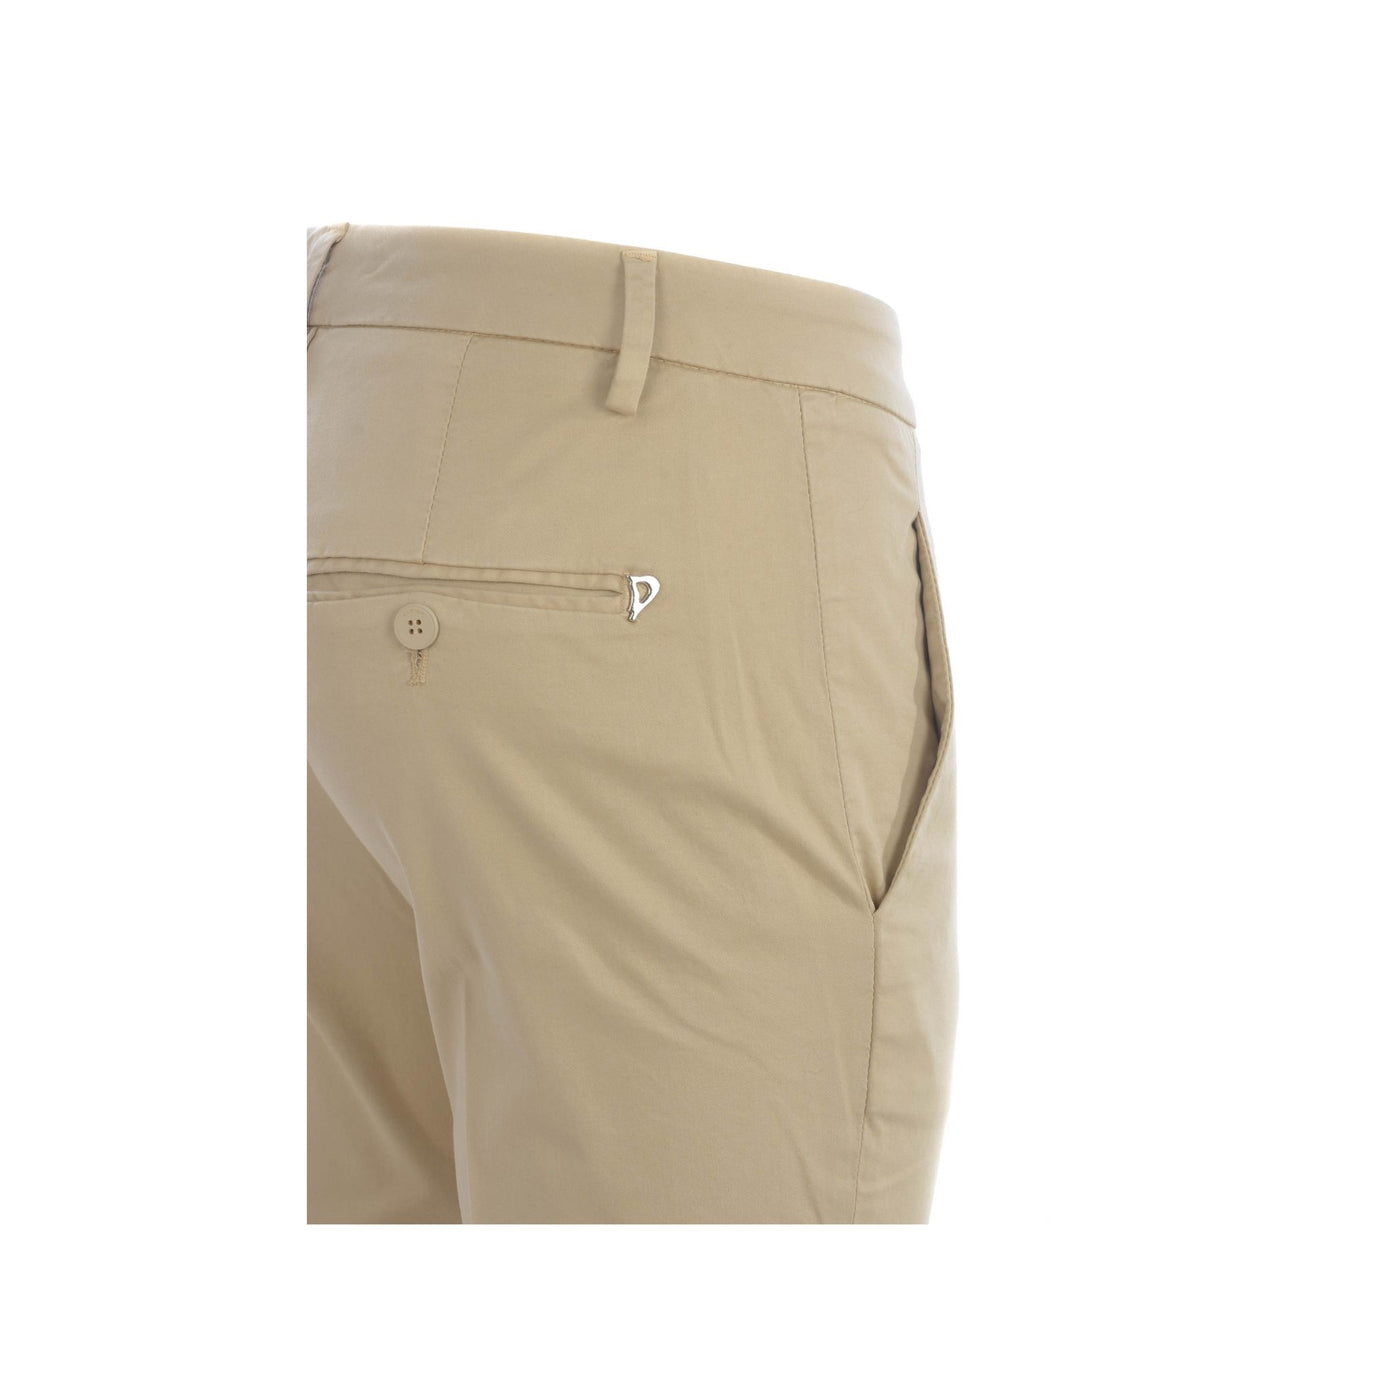 Women's trousers with concealed closure